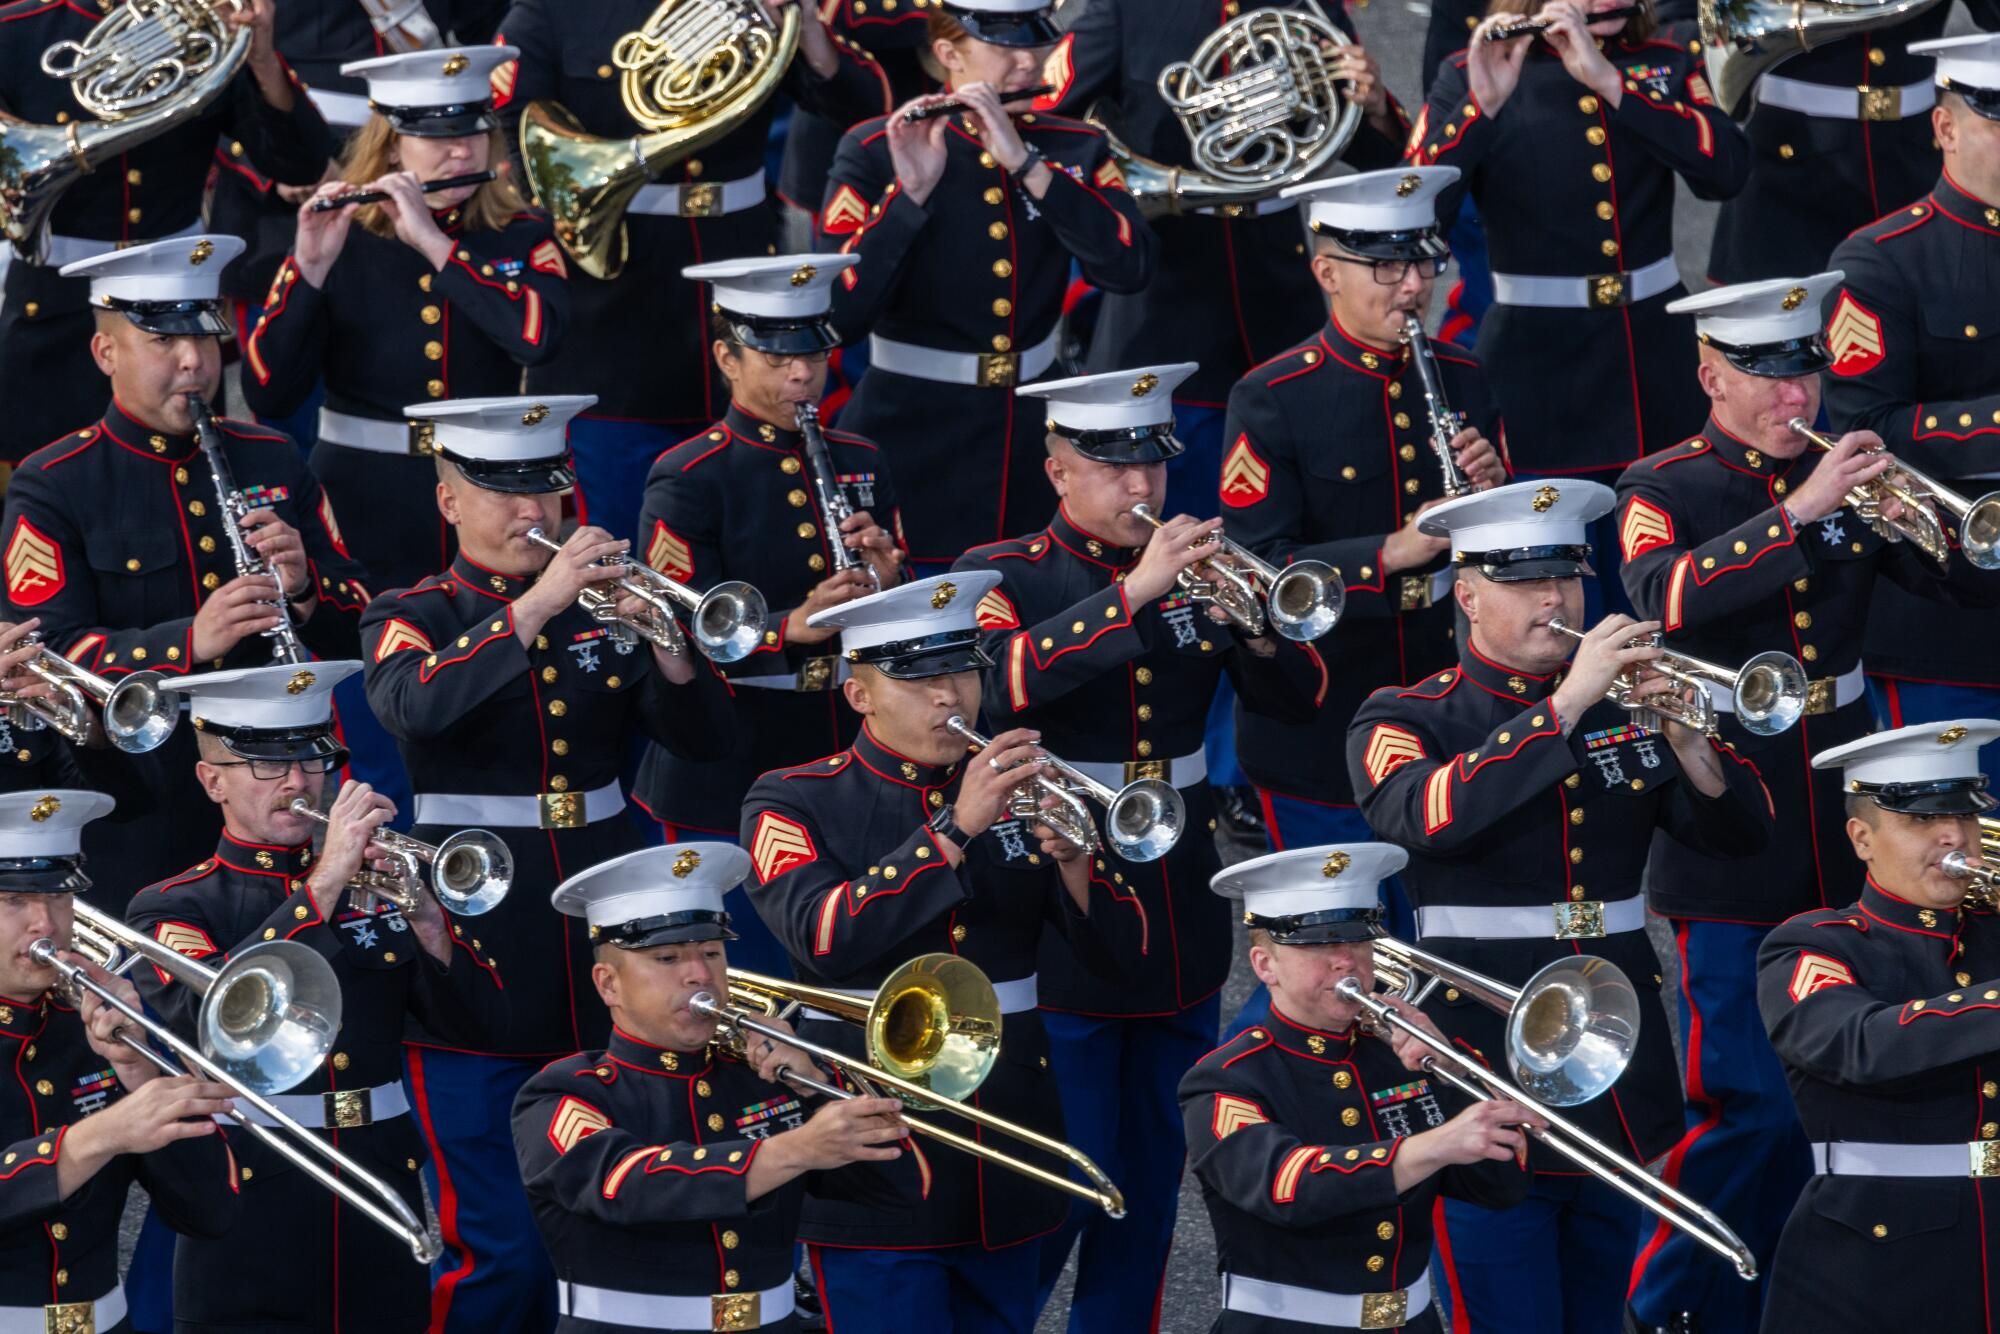 Marine Corps musicians in the Rose Parade.